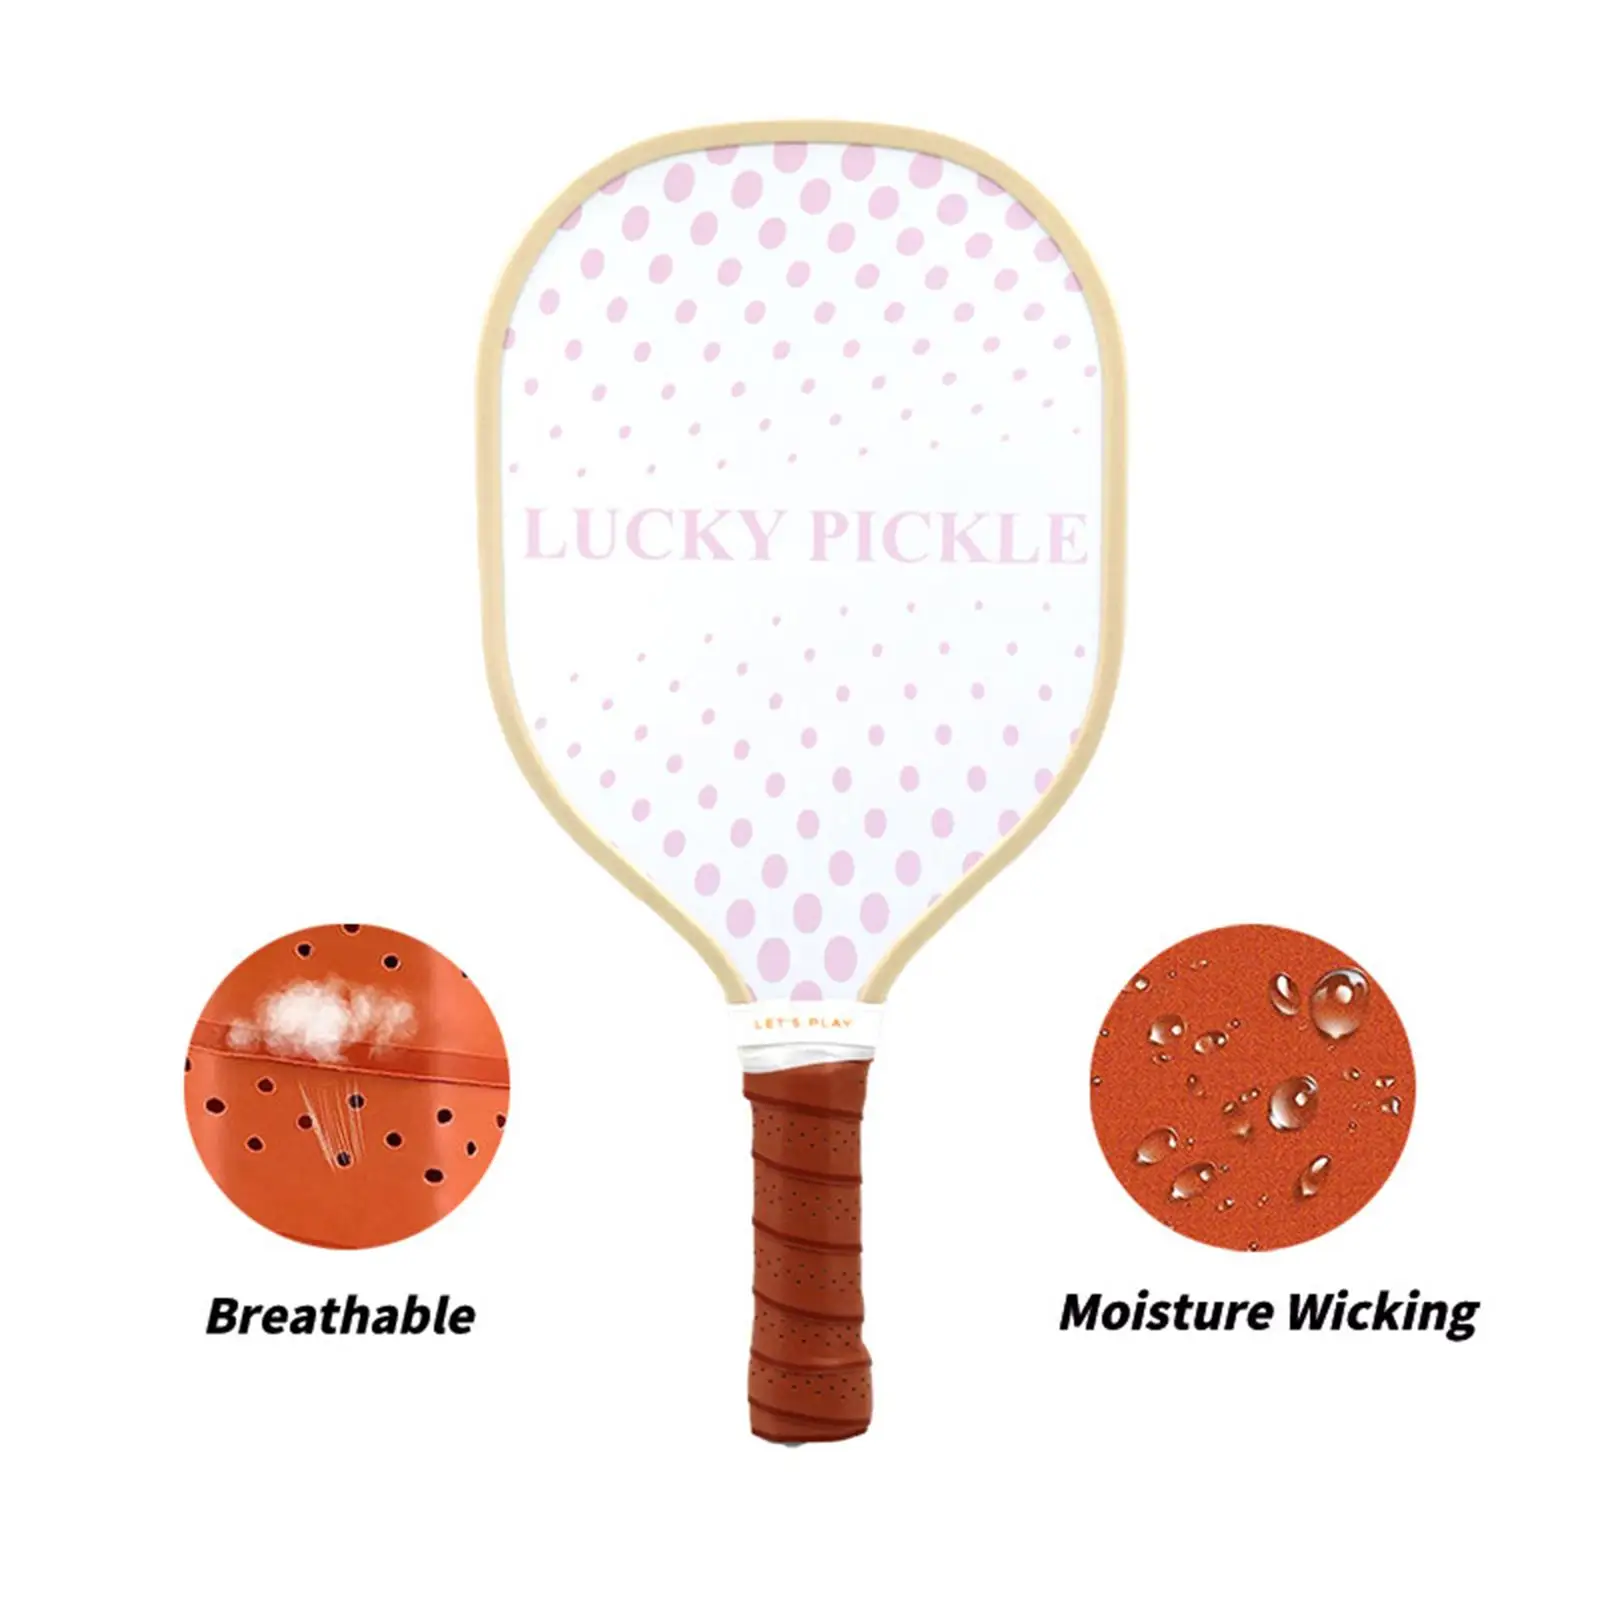 4x Wooden Pickleball Paddles Pickleball Rackets and Balls Gift Portable Pickleball Racquets for Indoor and Outdoor Tournament